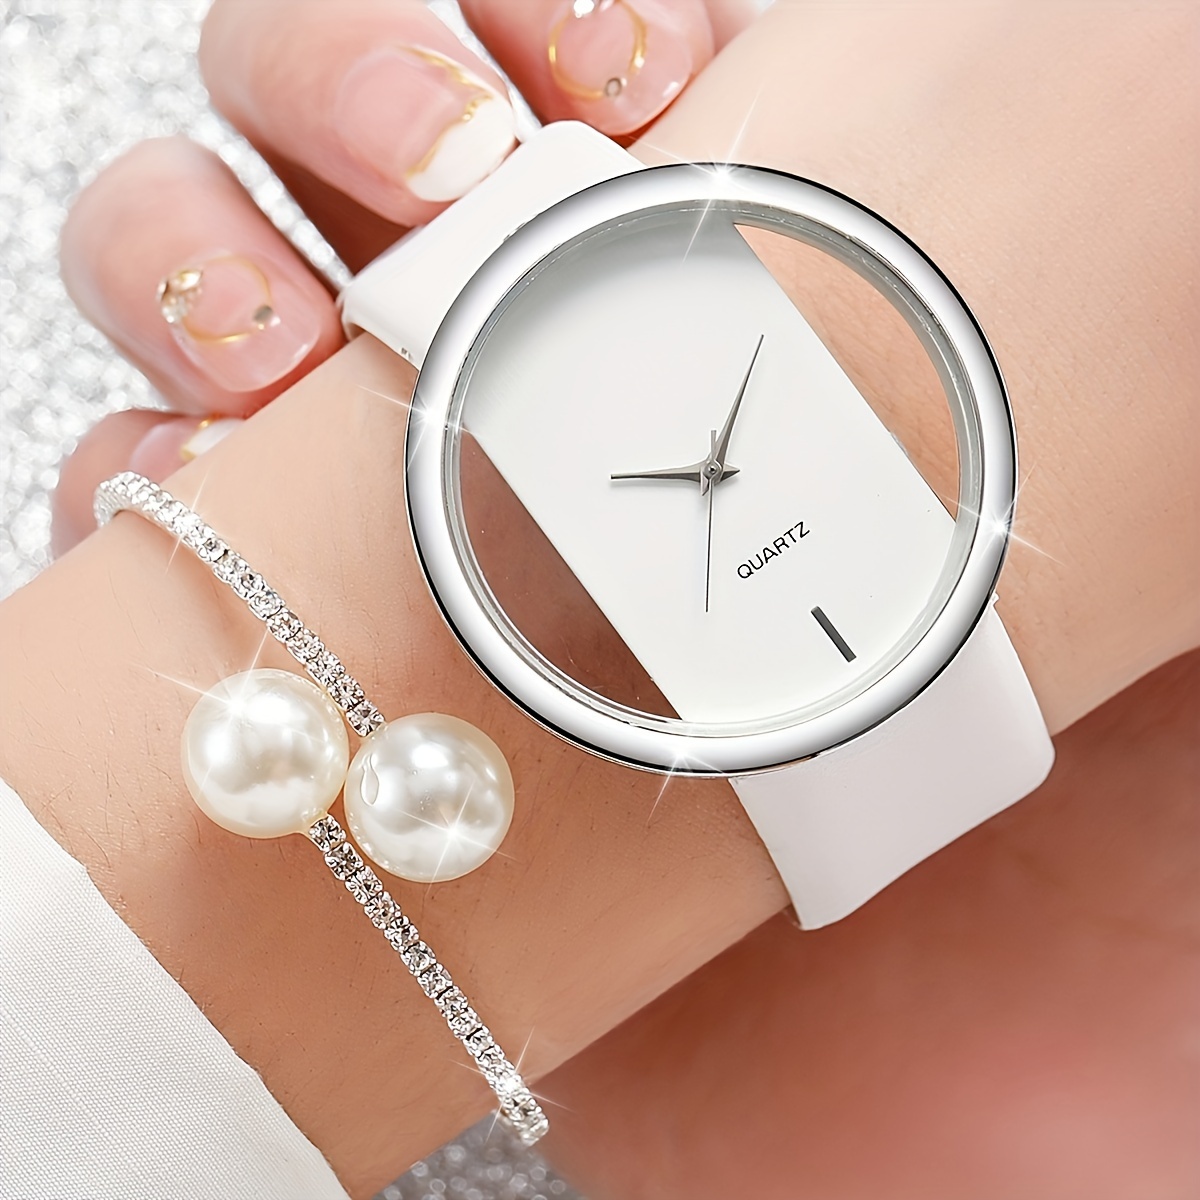 

2pcs/set Women's Casual Hollow Out Quartz Watch Analog Pu Leather Wrist Watch & Faux Pearl Bangle, Gift For Mom Her